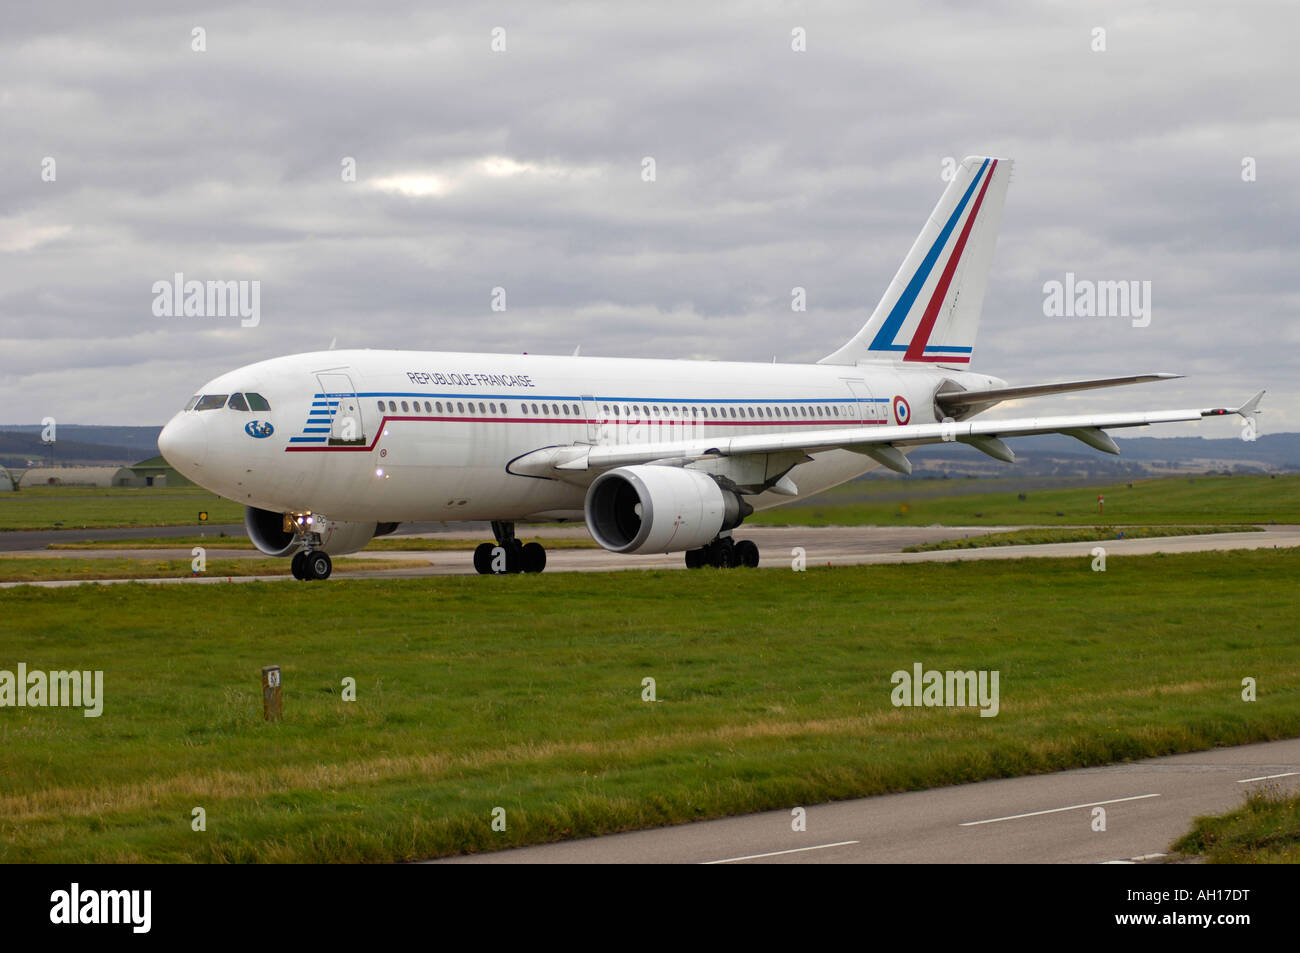 French Airbus 310-340 Based at Charles de Gaulle (Roissy) Twin Engine Airliner Built by The Airbus Consortium Stock Photo